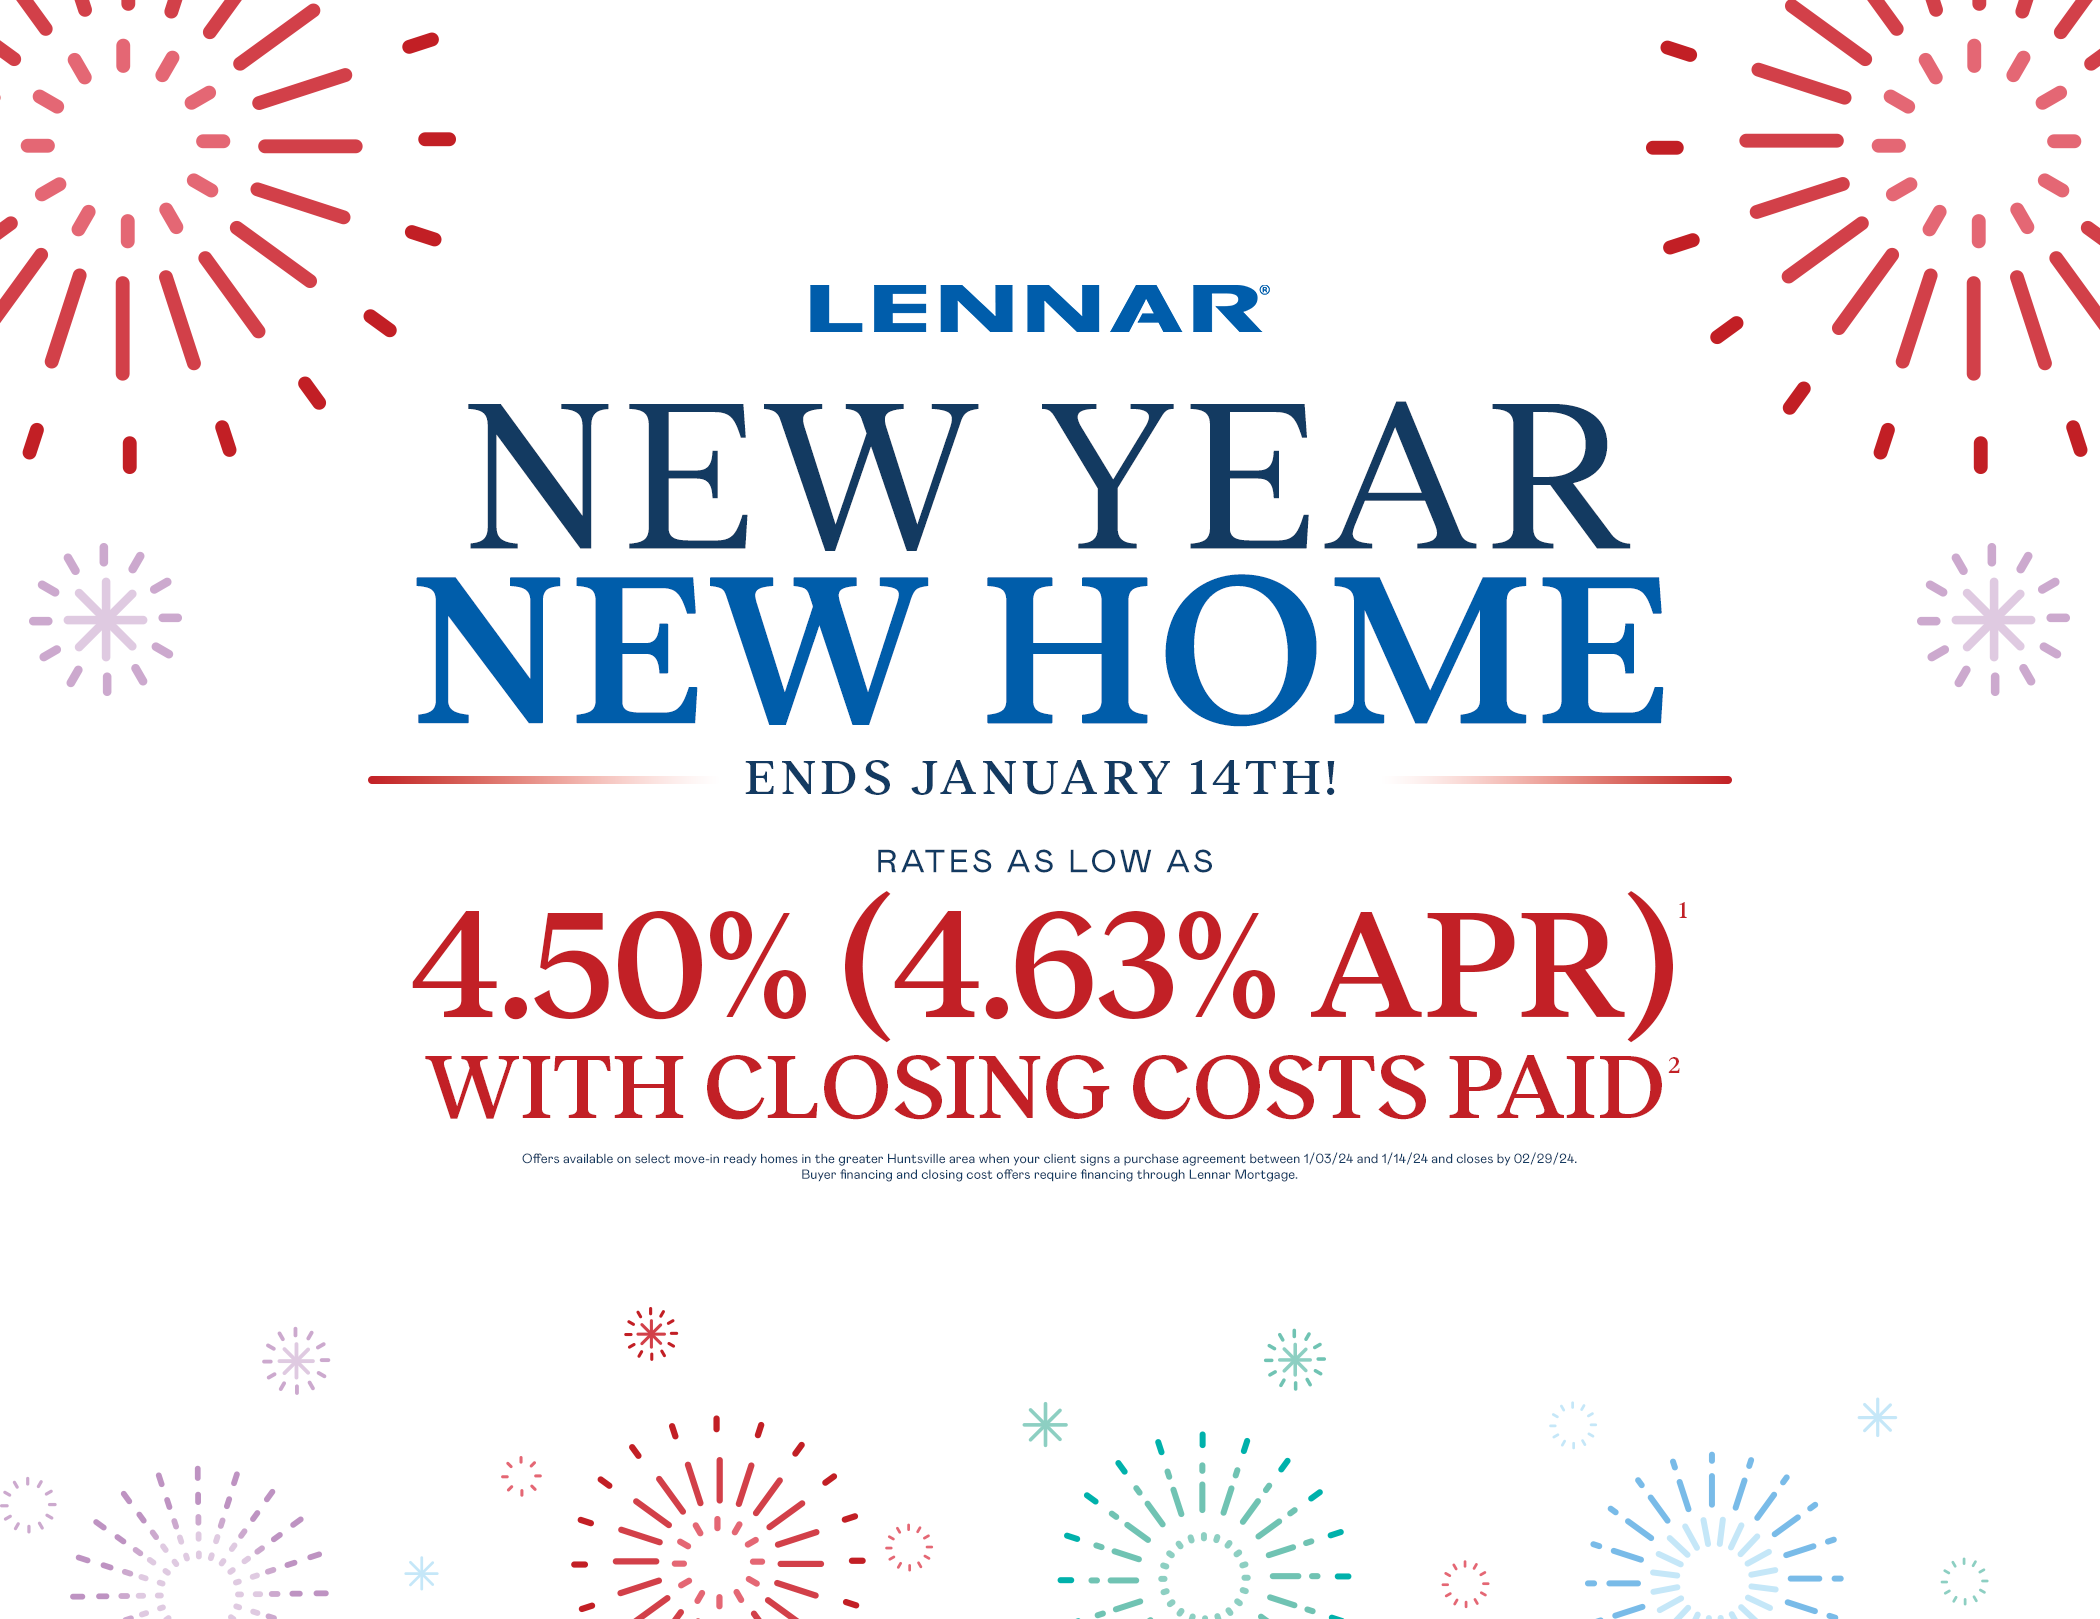 Lennar's New Year New Home Sale